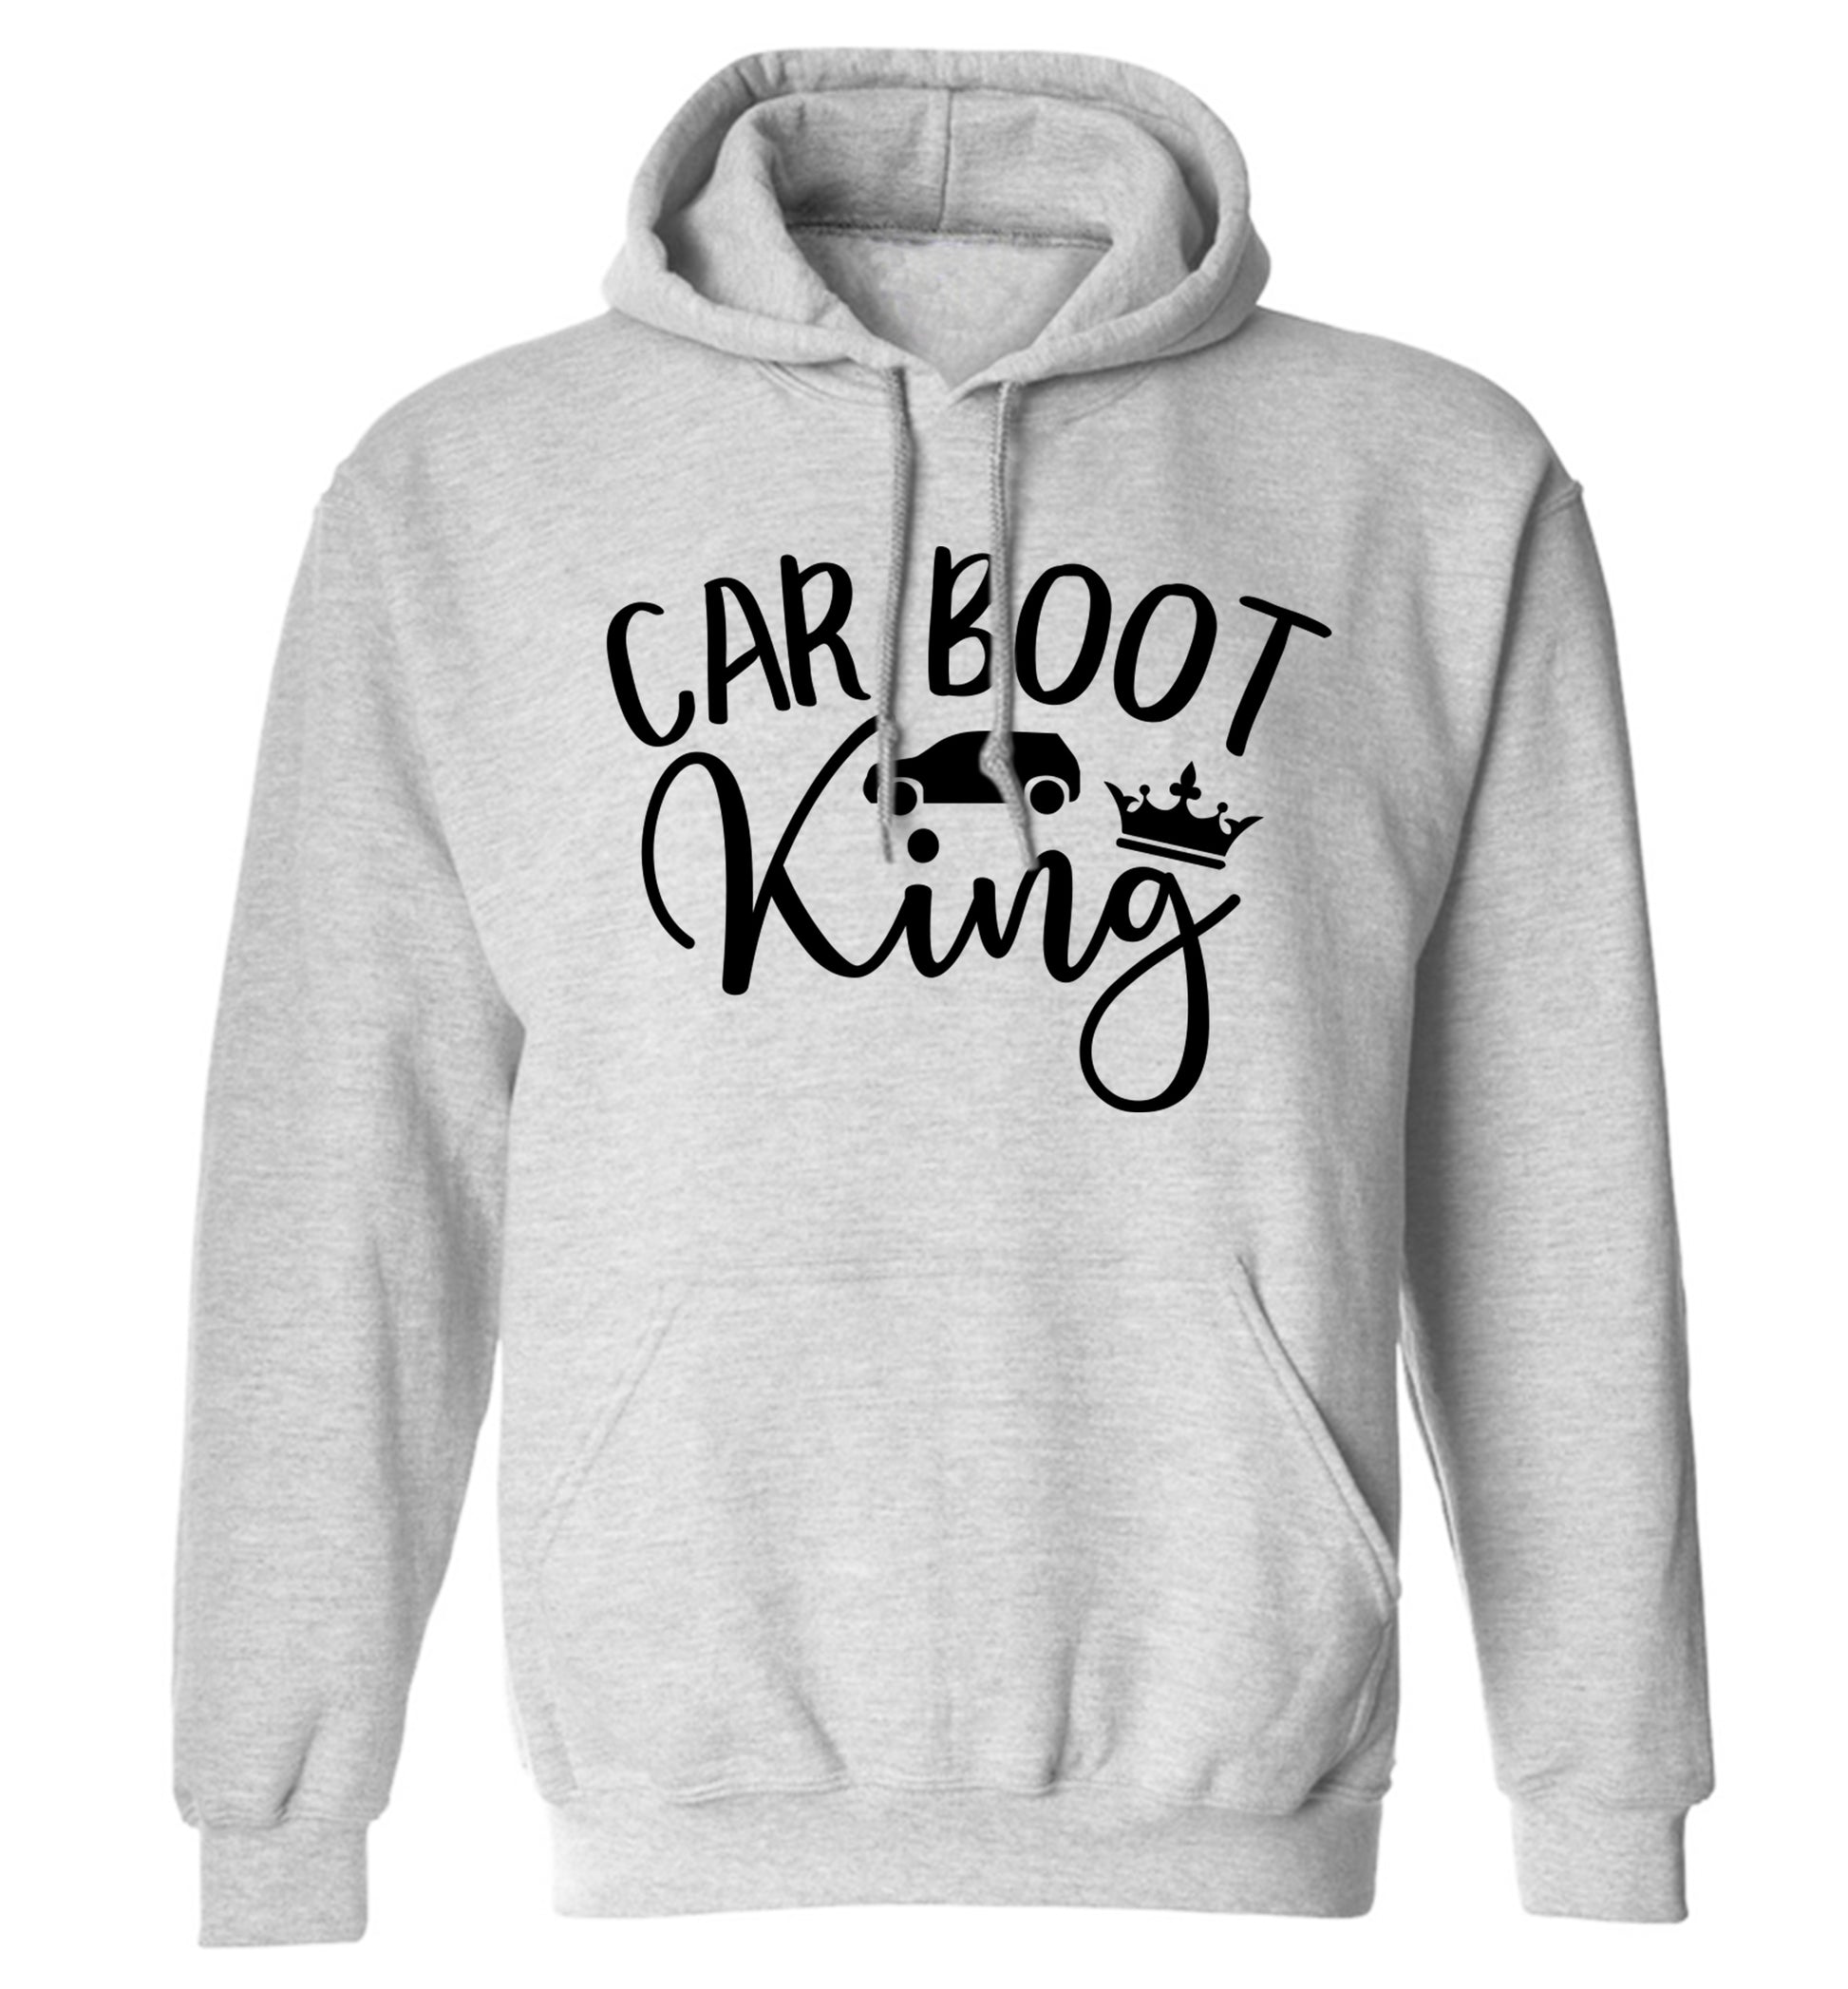 Carboot King adults unisex grey hoodie 2XL